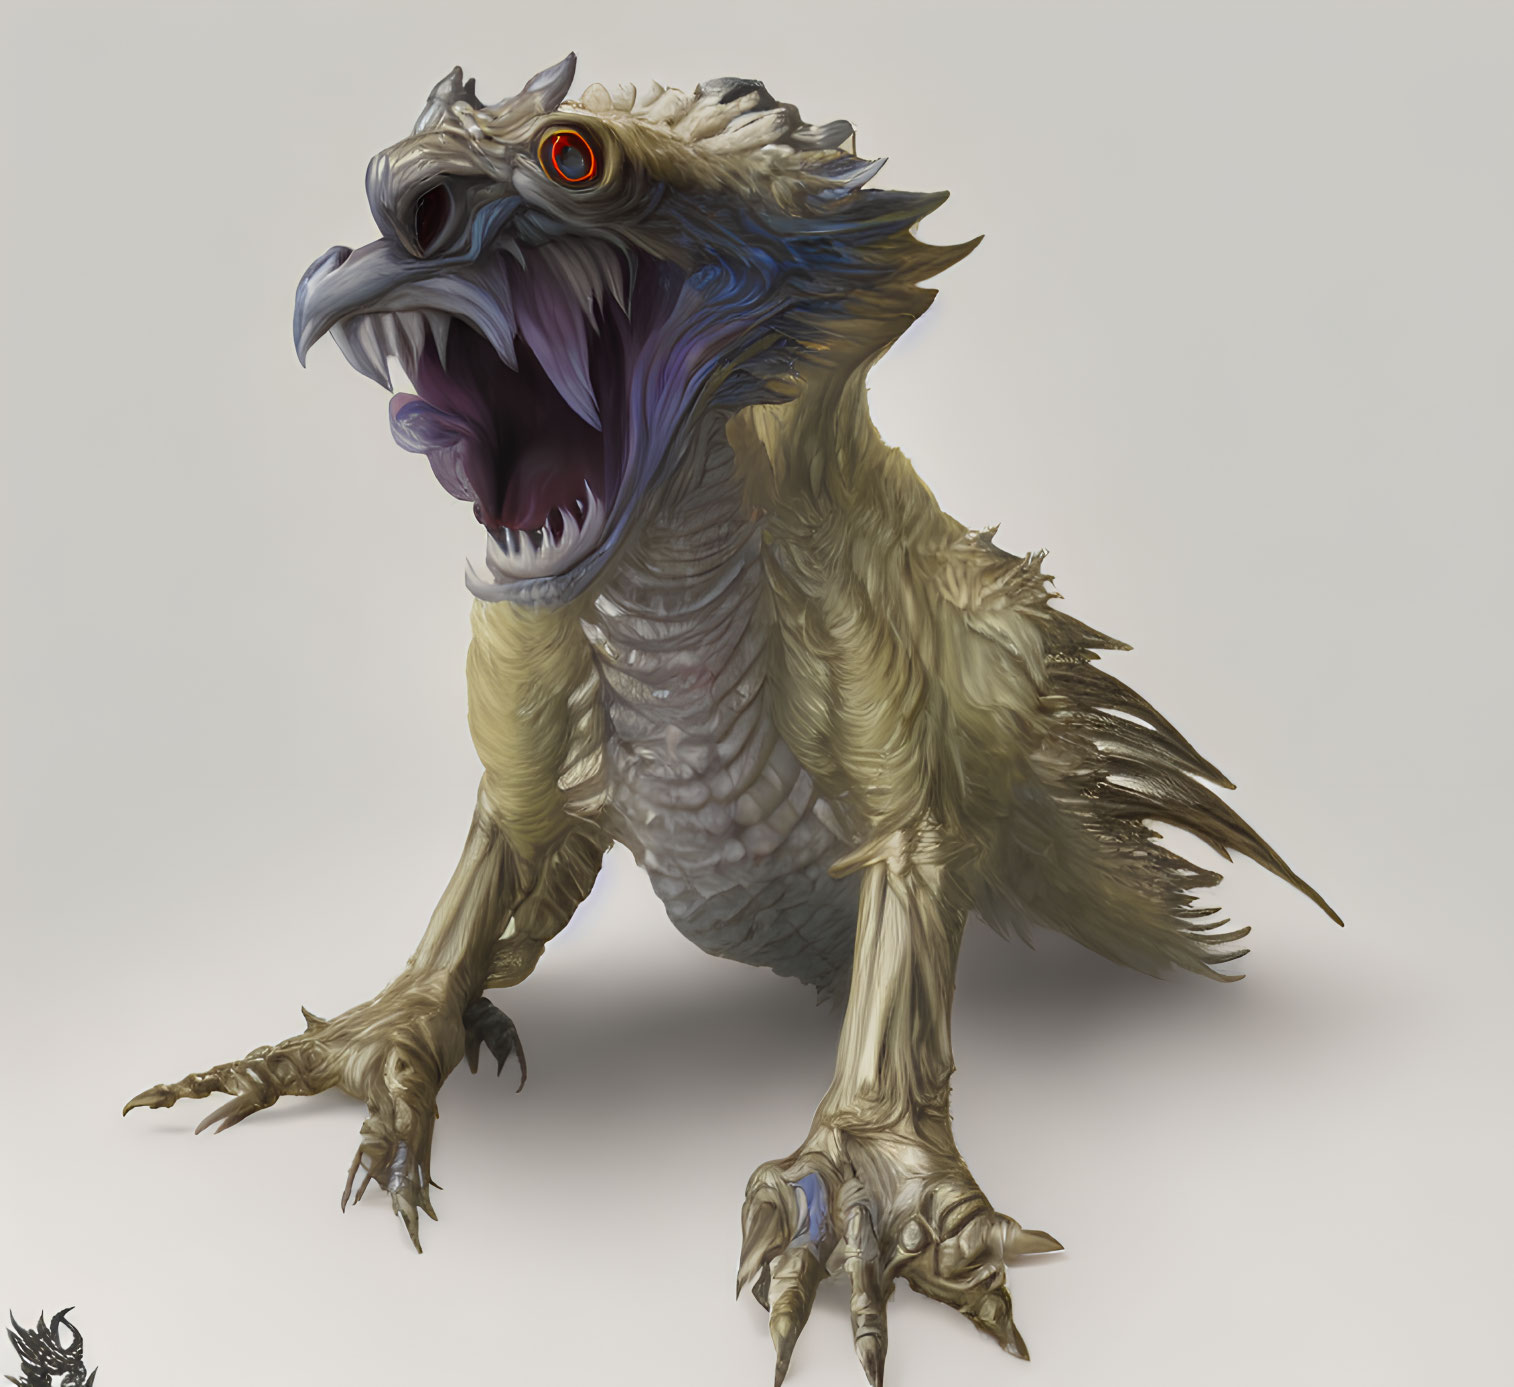 Fantastical bird-reptile creature with sharp claws and red eyes